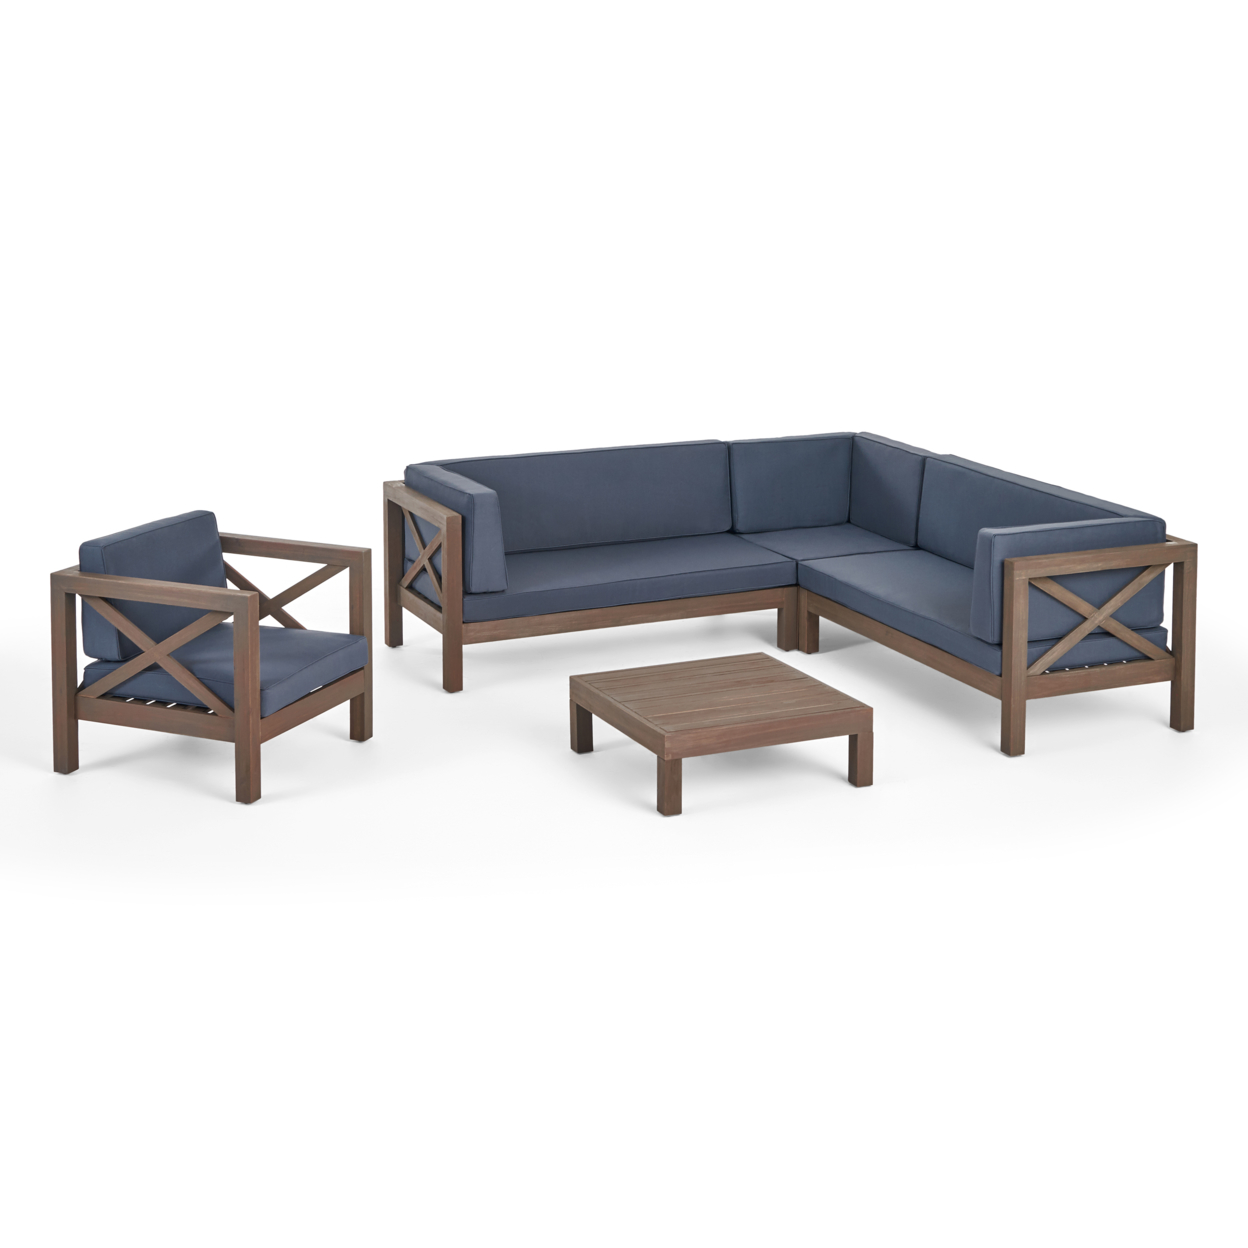 Morgan Outdoor 6 Seater Acacia Wood Sectional Sofa And Club Chair Set - Teak Finish + Blue